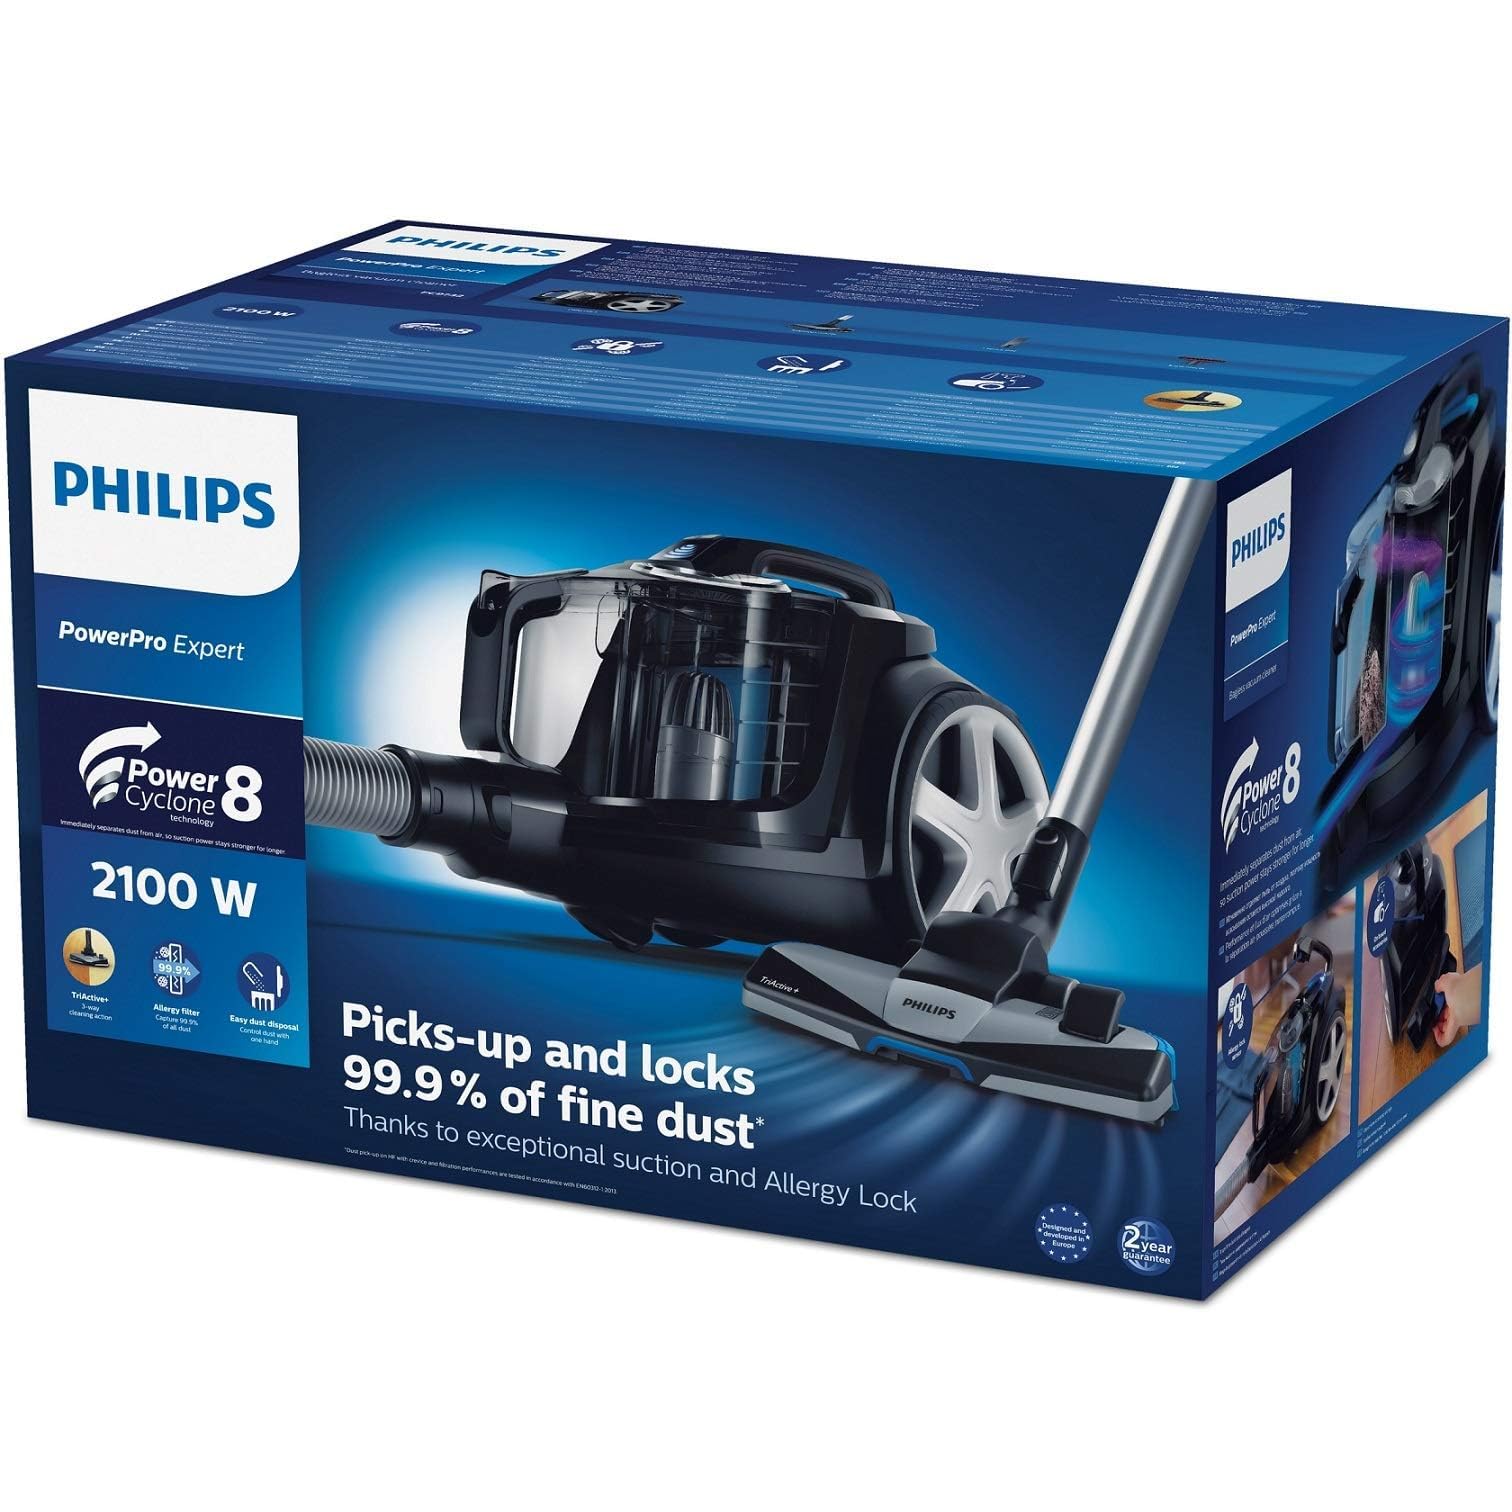 Philips Powerpro Expert Bagless, Deep Black Fc9732/61: 2100W, 420W Suction Power, Powercyclone 8, 2L Dust Capacity, Allergy Filter, Triactive+ Nozzle, Crevice Tool, Active Lock,2 Years Warranty